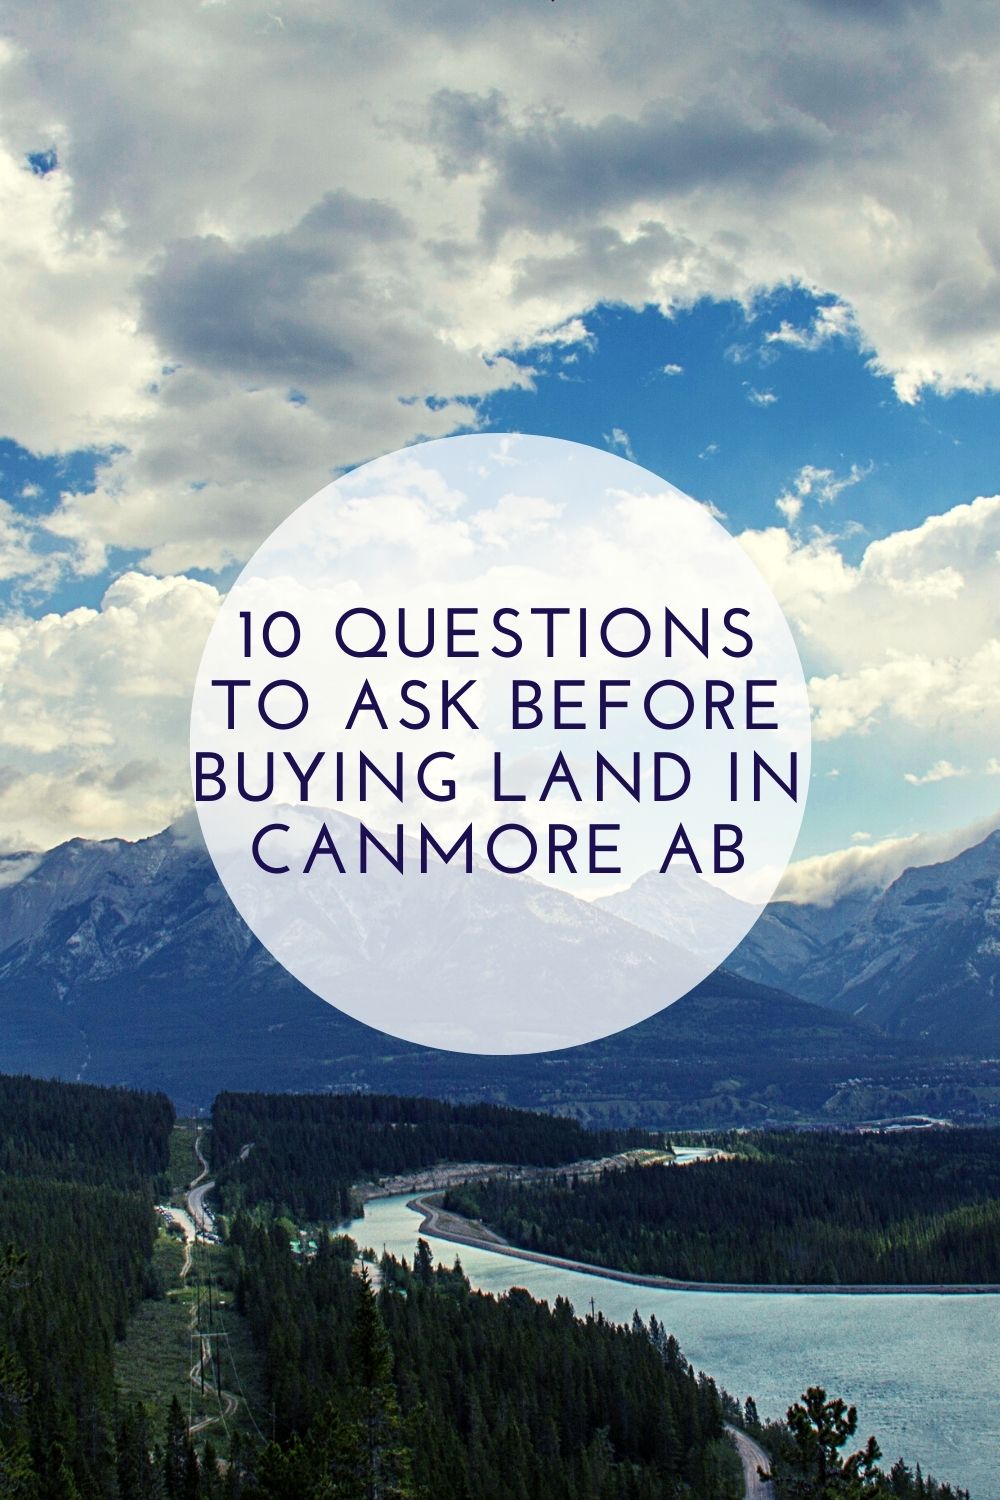 10 Questions to Ask Before Buying Land in Canmore AB